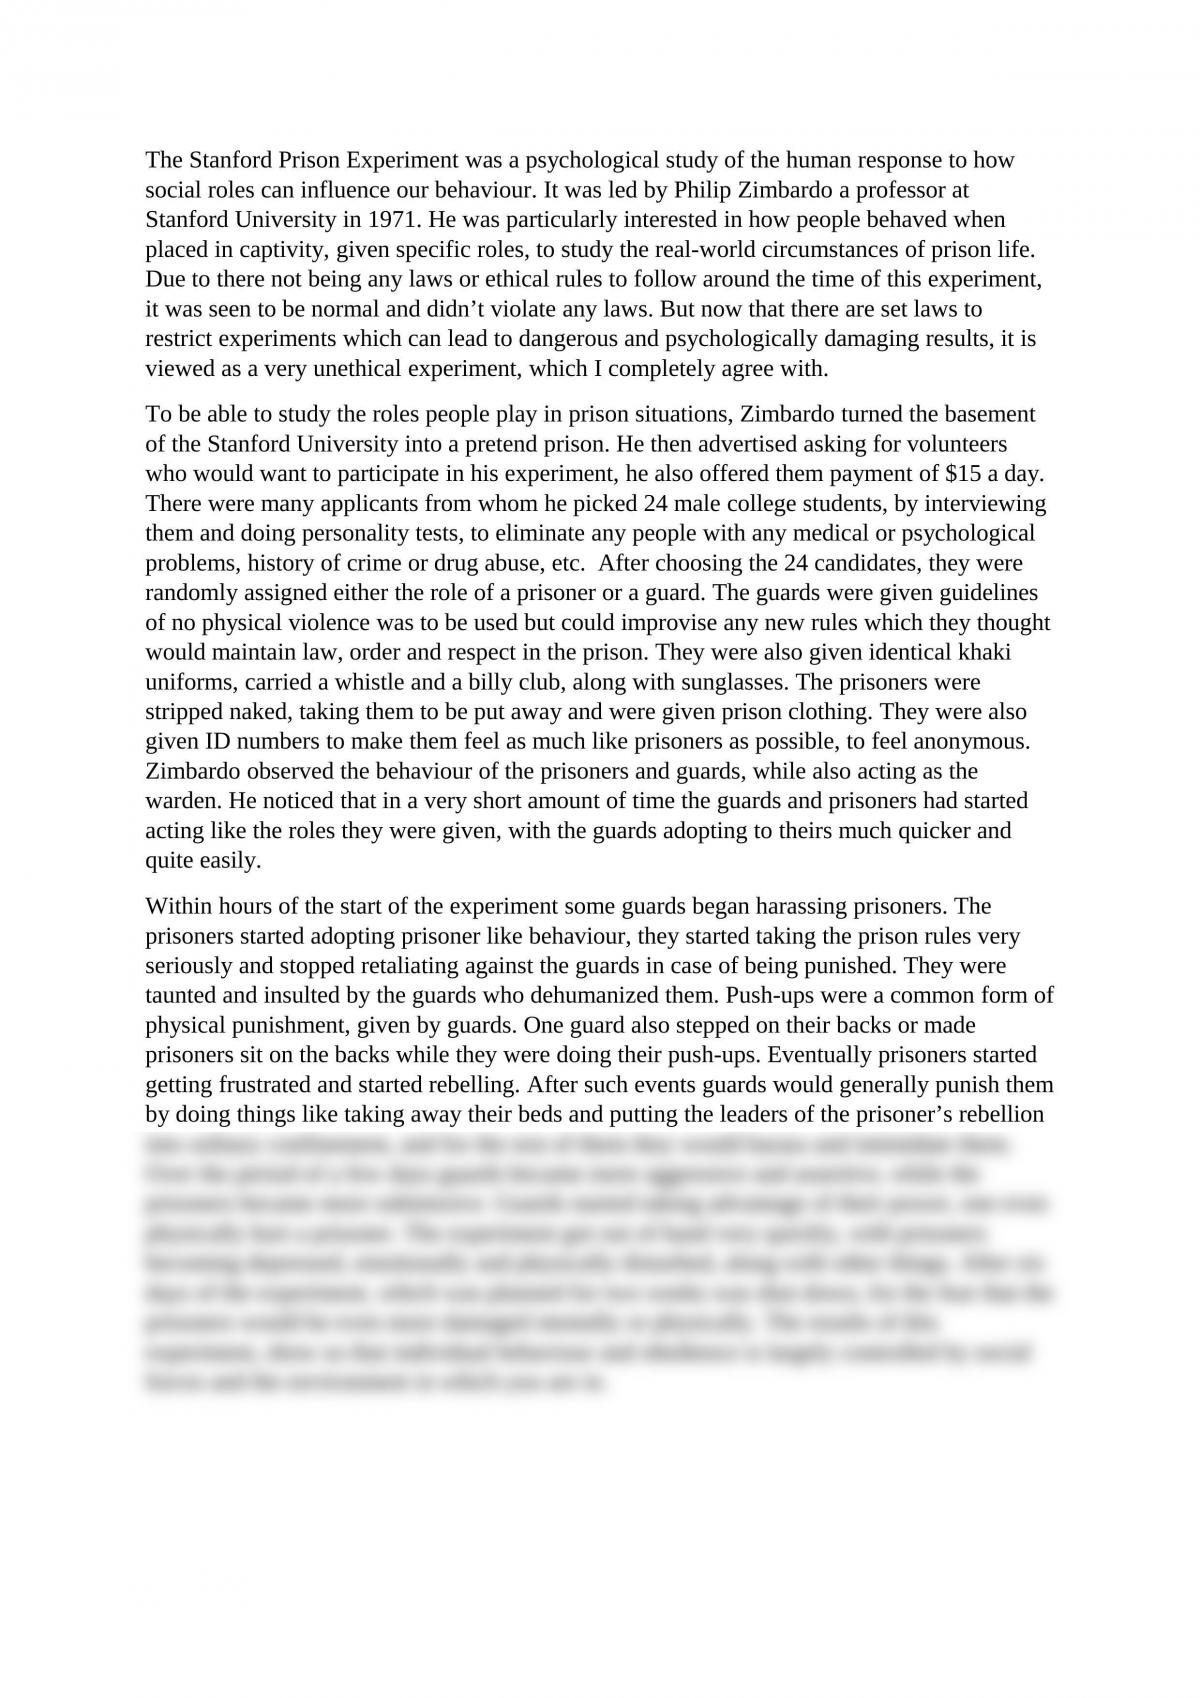 stanford prison experiment ethical issues essay